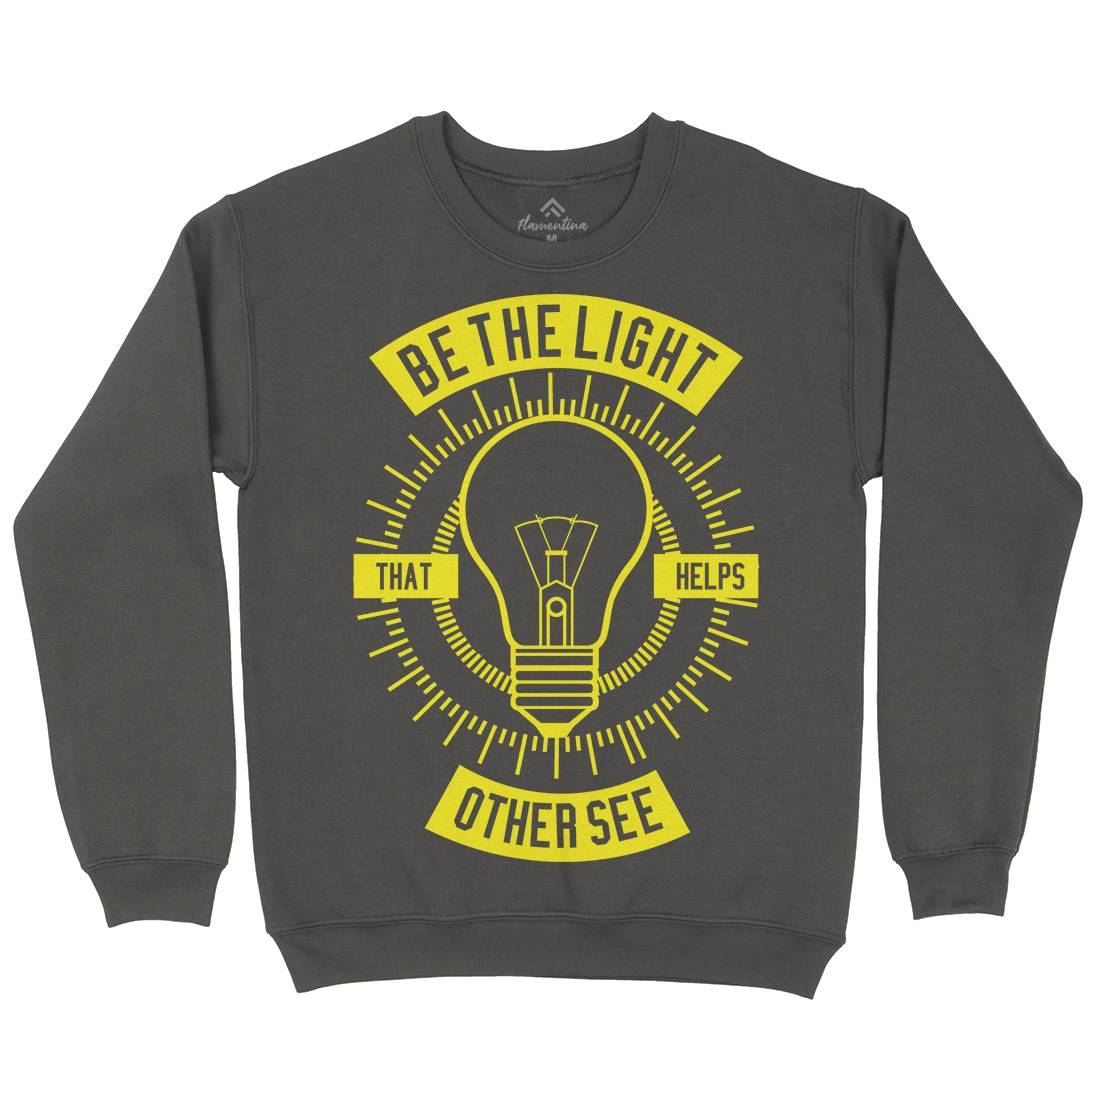 Be The Light Kids Crew Neck Sweatshirt Quotes A206